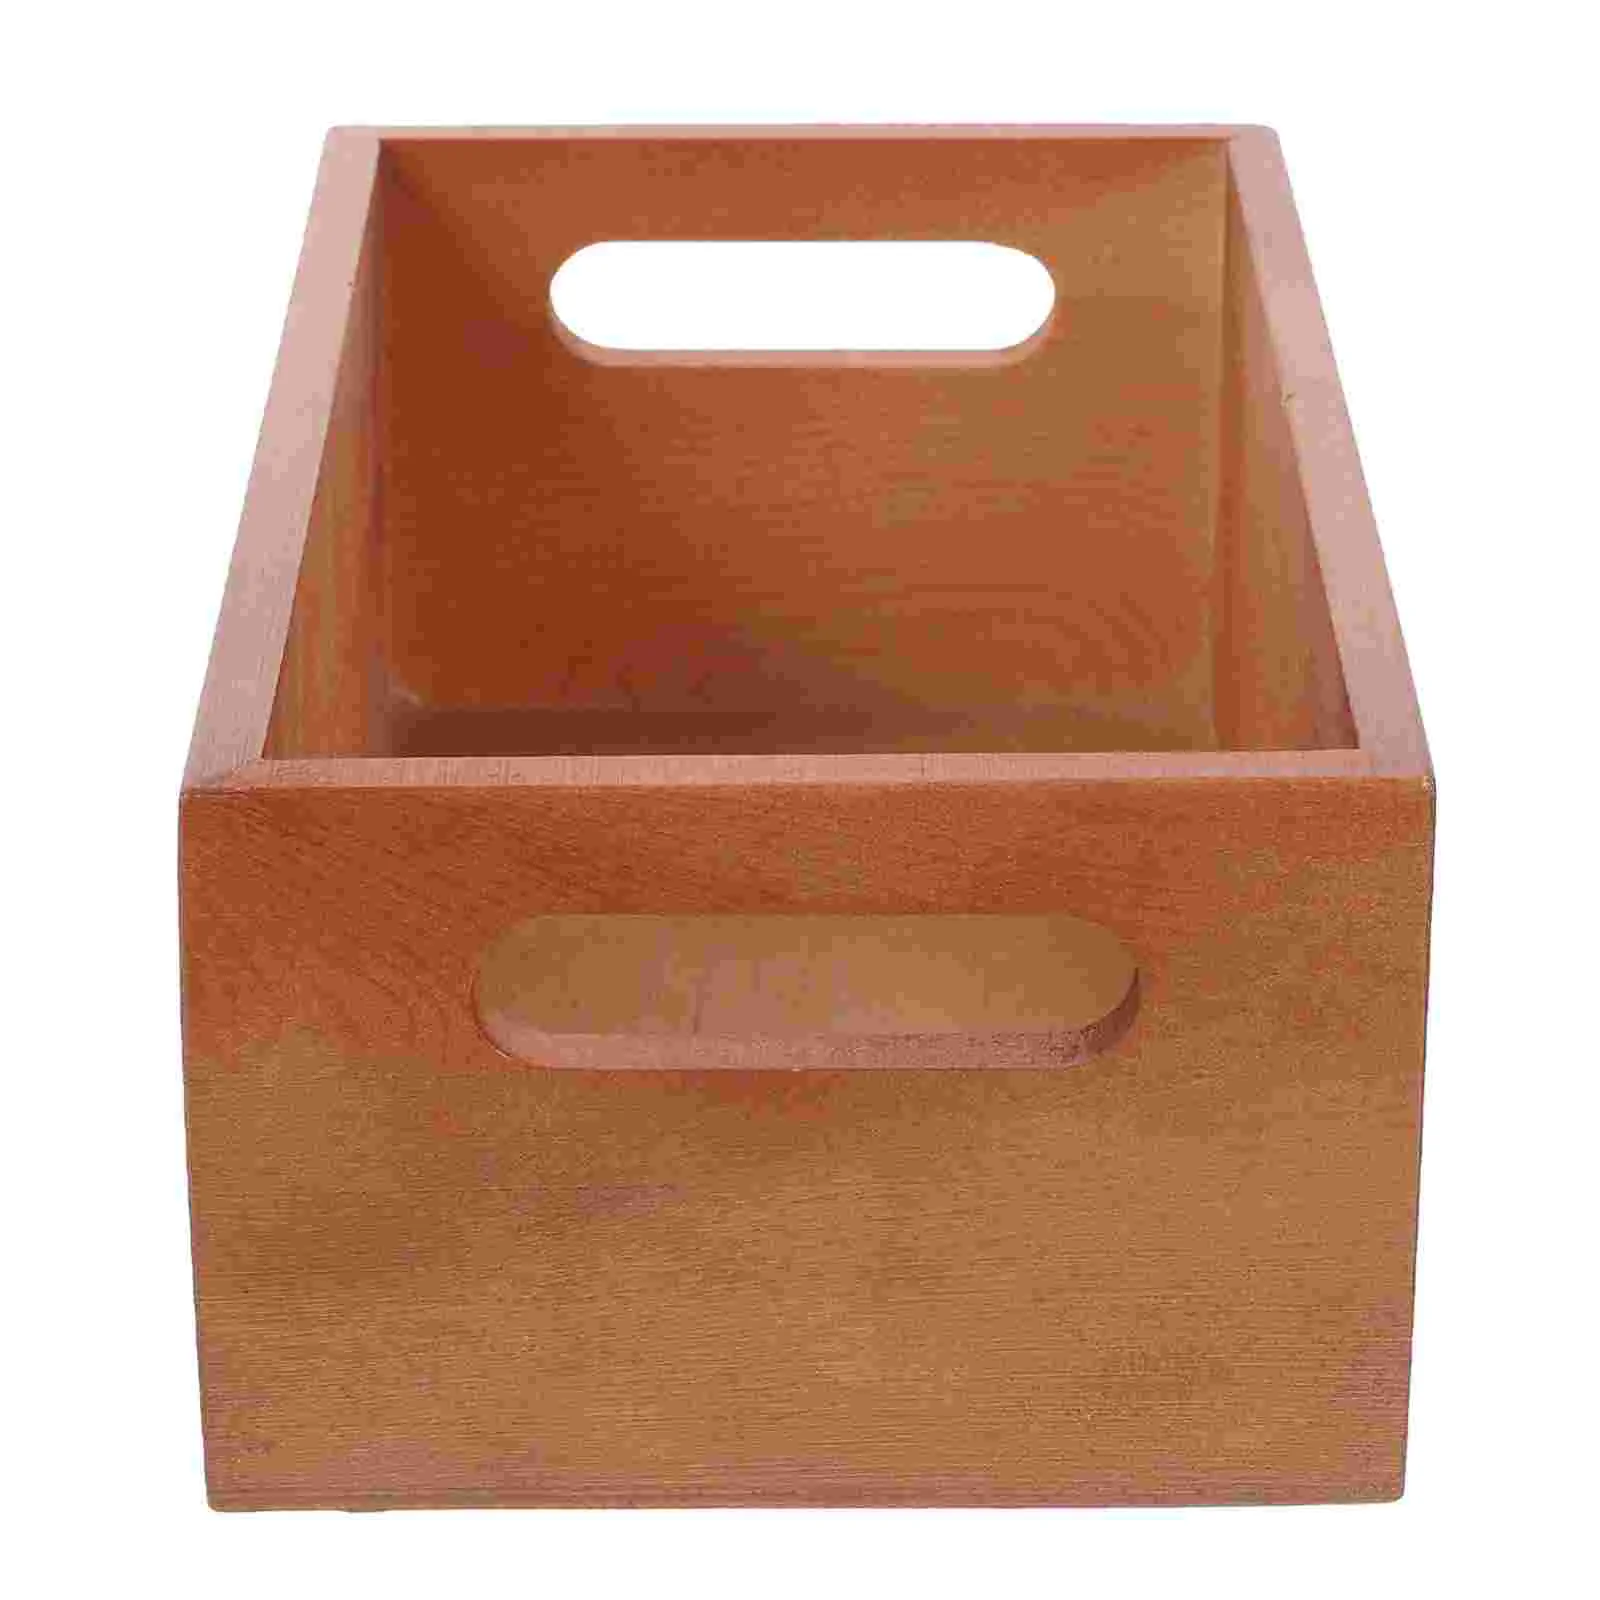 

Wooden Storage Box Jewelry Organizer Container Home Craft Boxes Tray DIY Rustic Household Coffee Supply for Crafts Holder